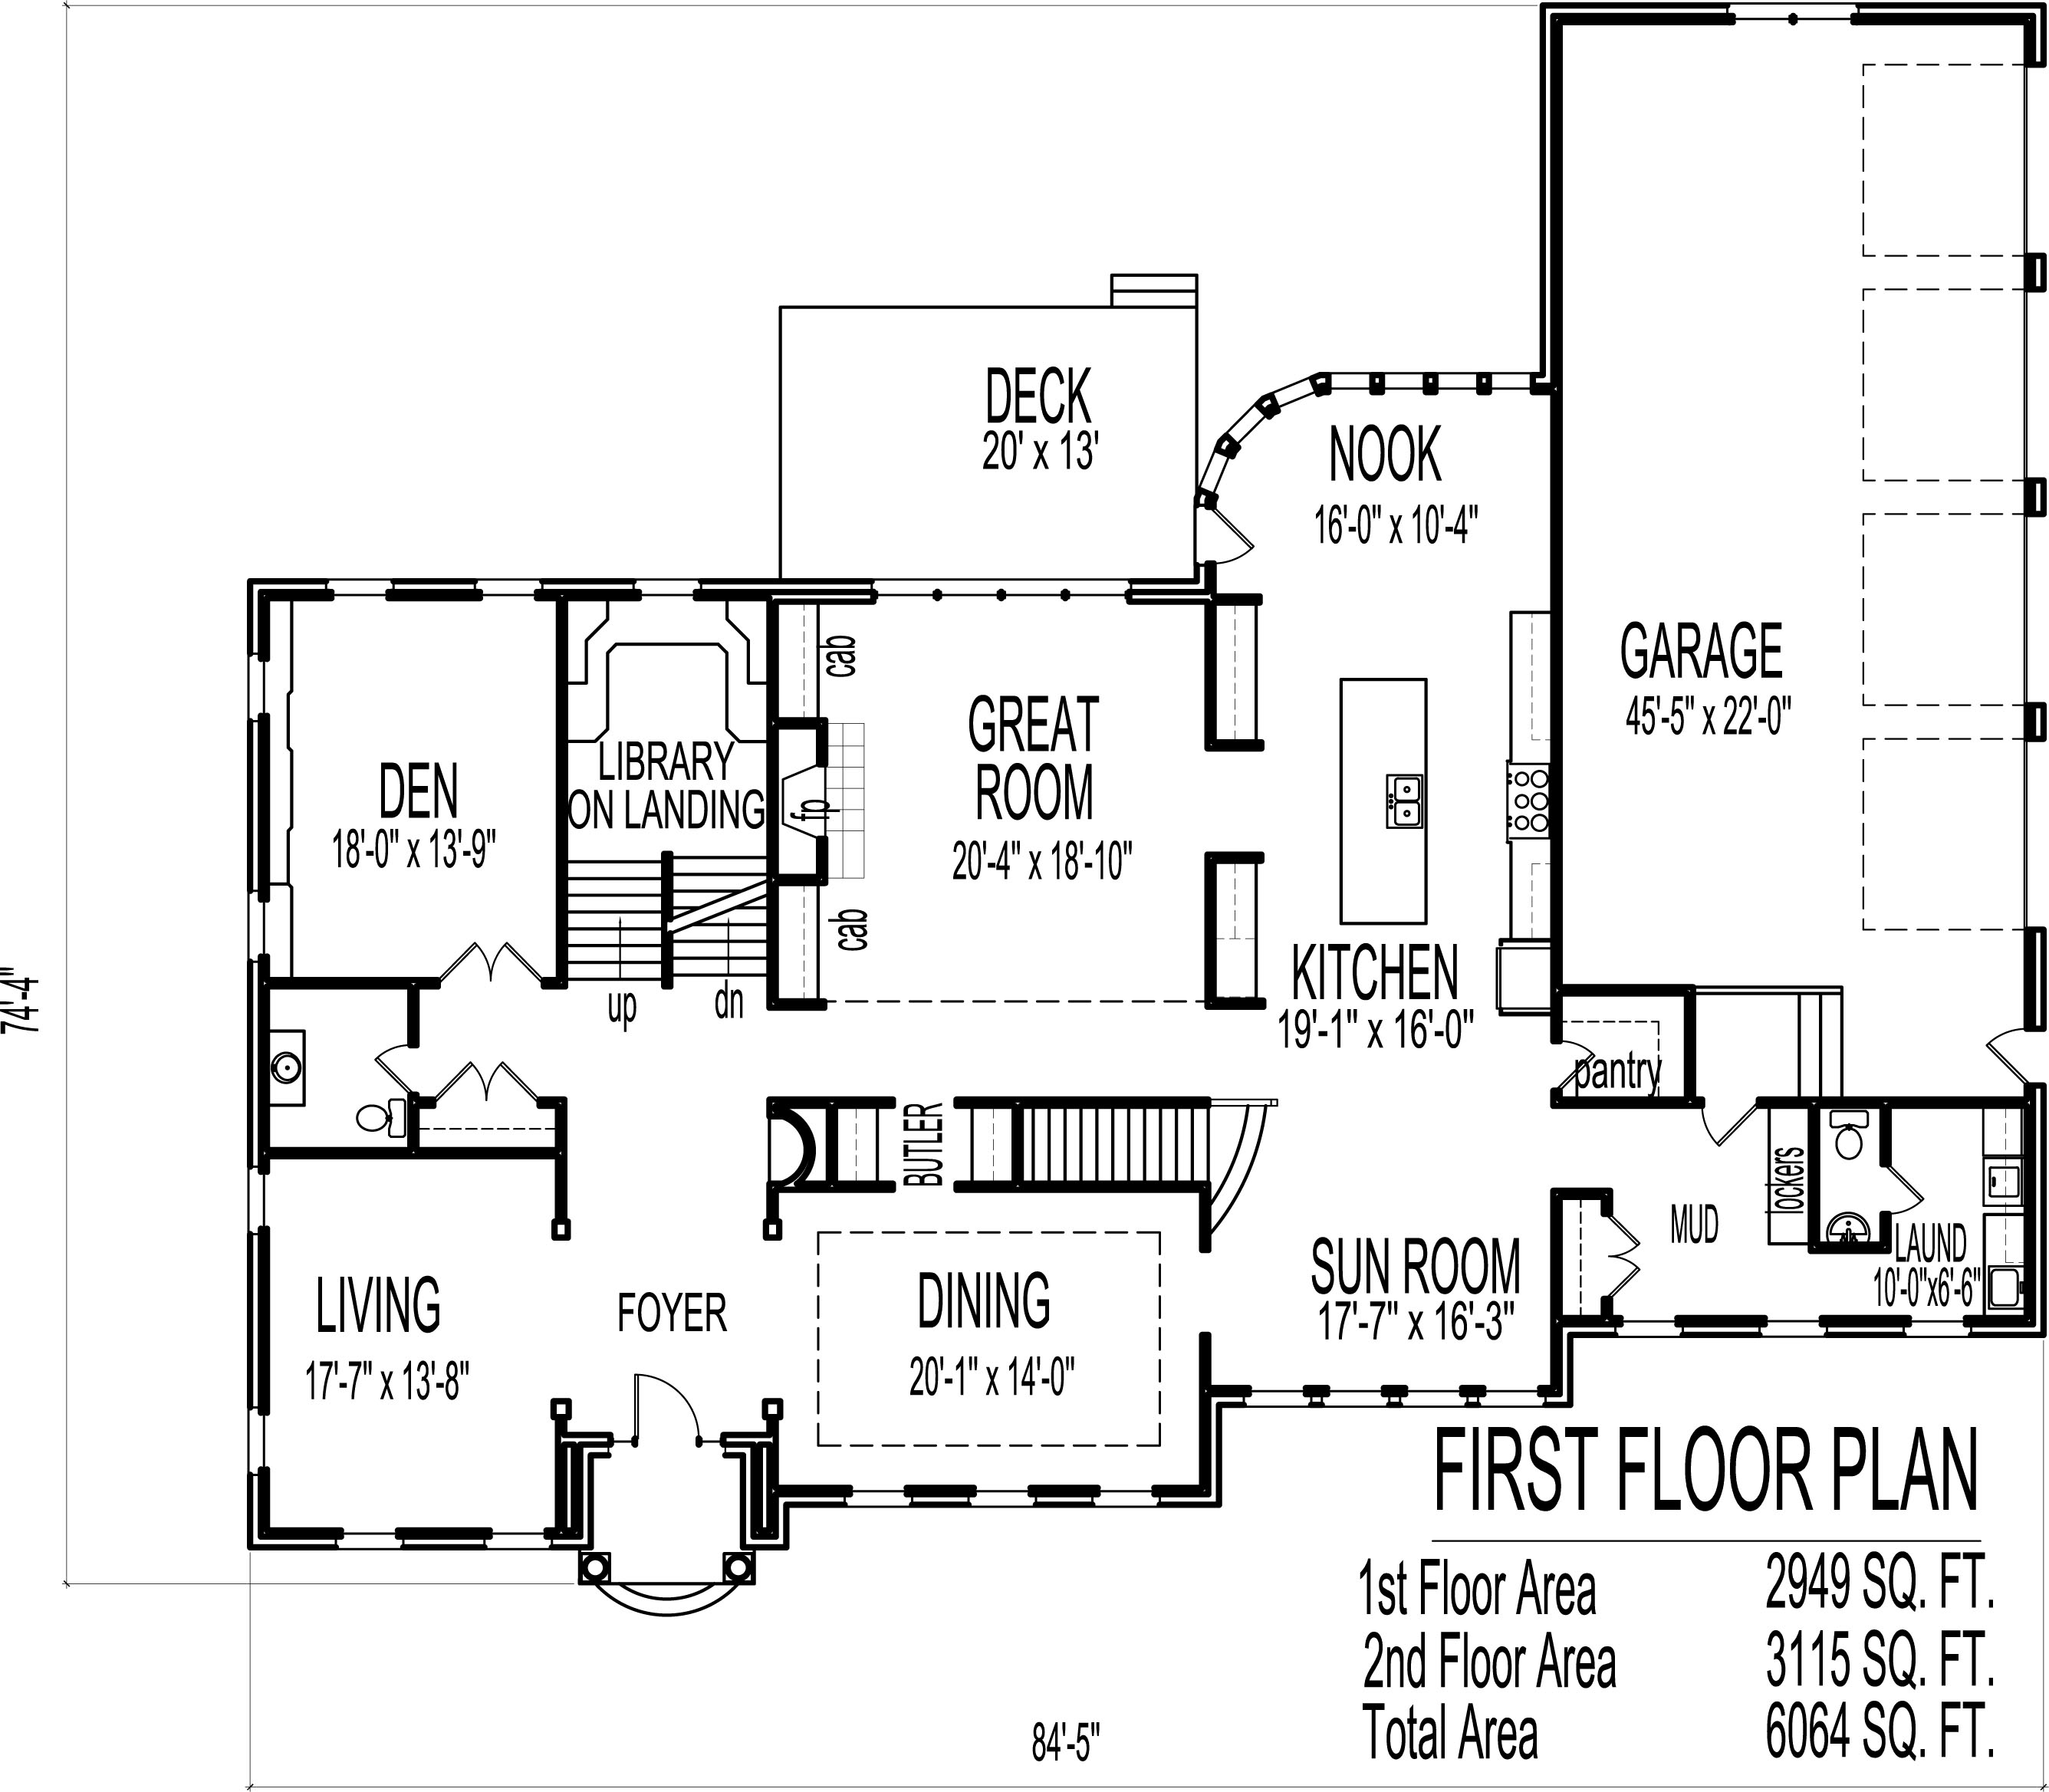 Large House Plans Colonial Style 4 Car Garage 6000 Sq Ft Million Dollar Home,What Are Neutral Colours Clothes